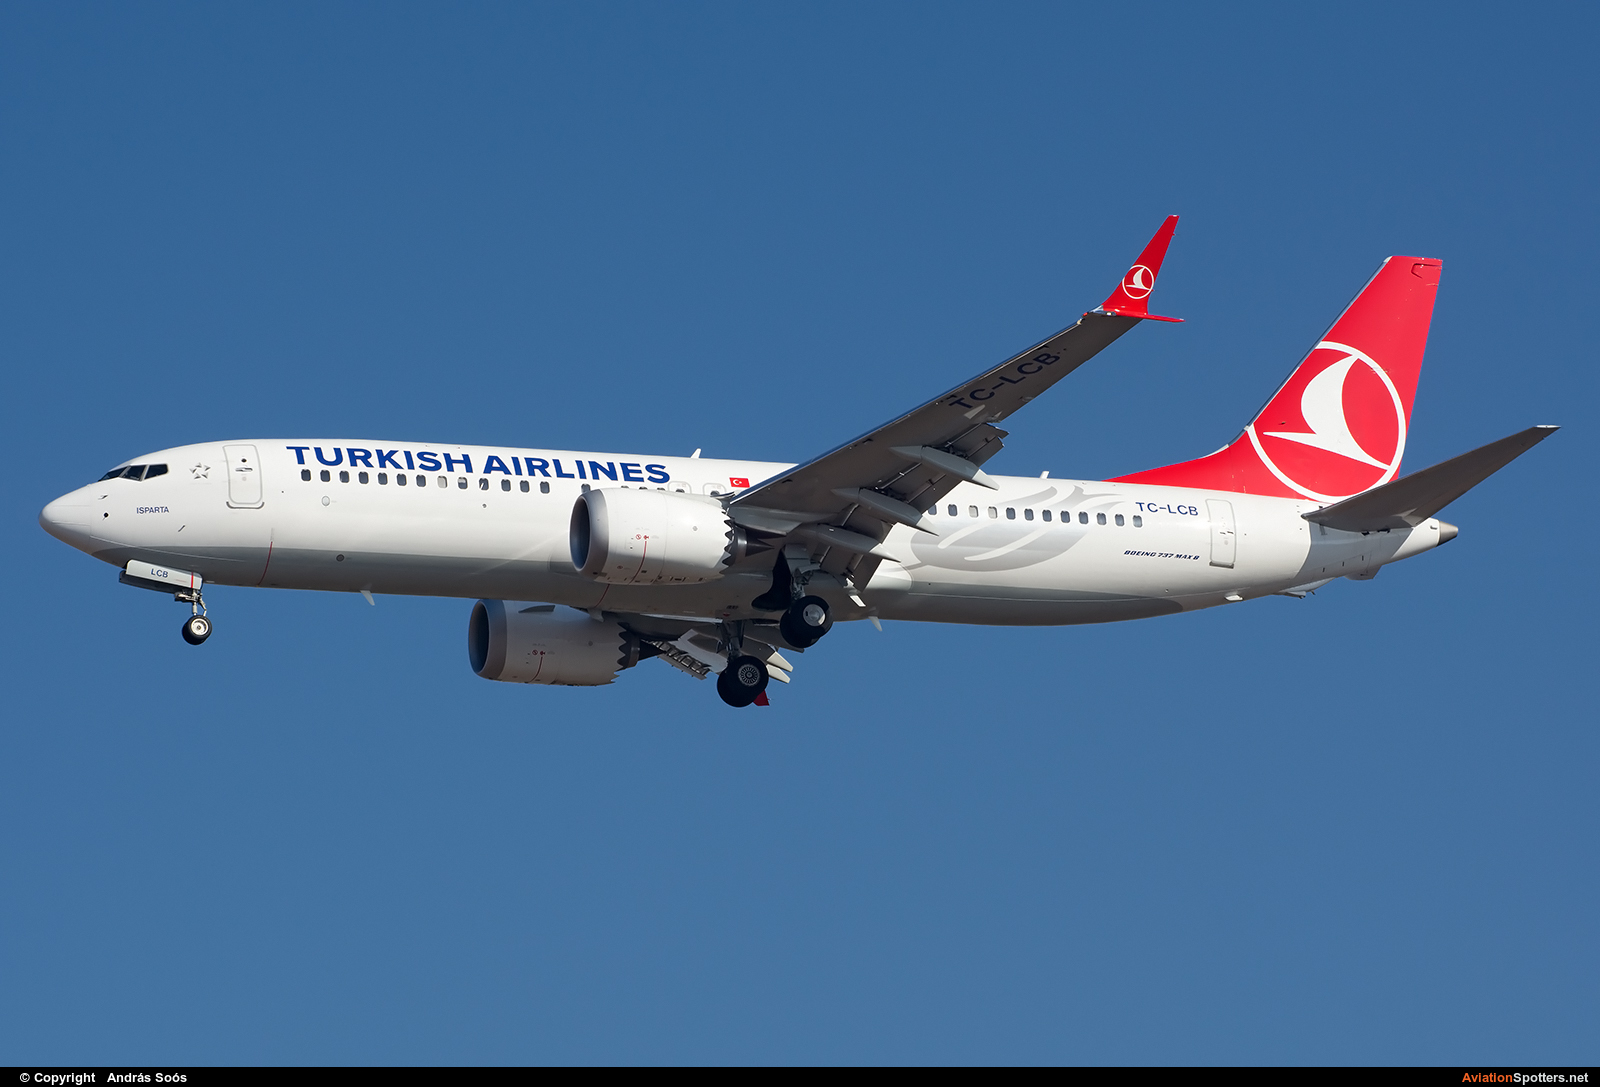 Turkish Airlines  -  737 MAX 8  (TC-LCB) By András Soós (sas1965)